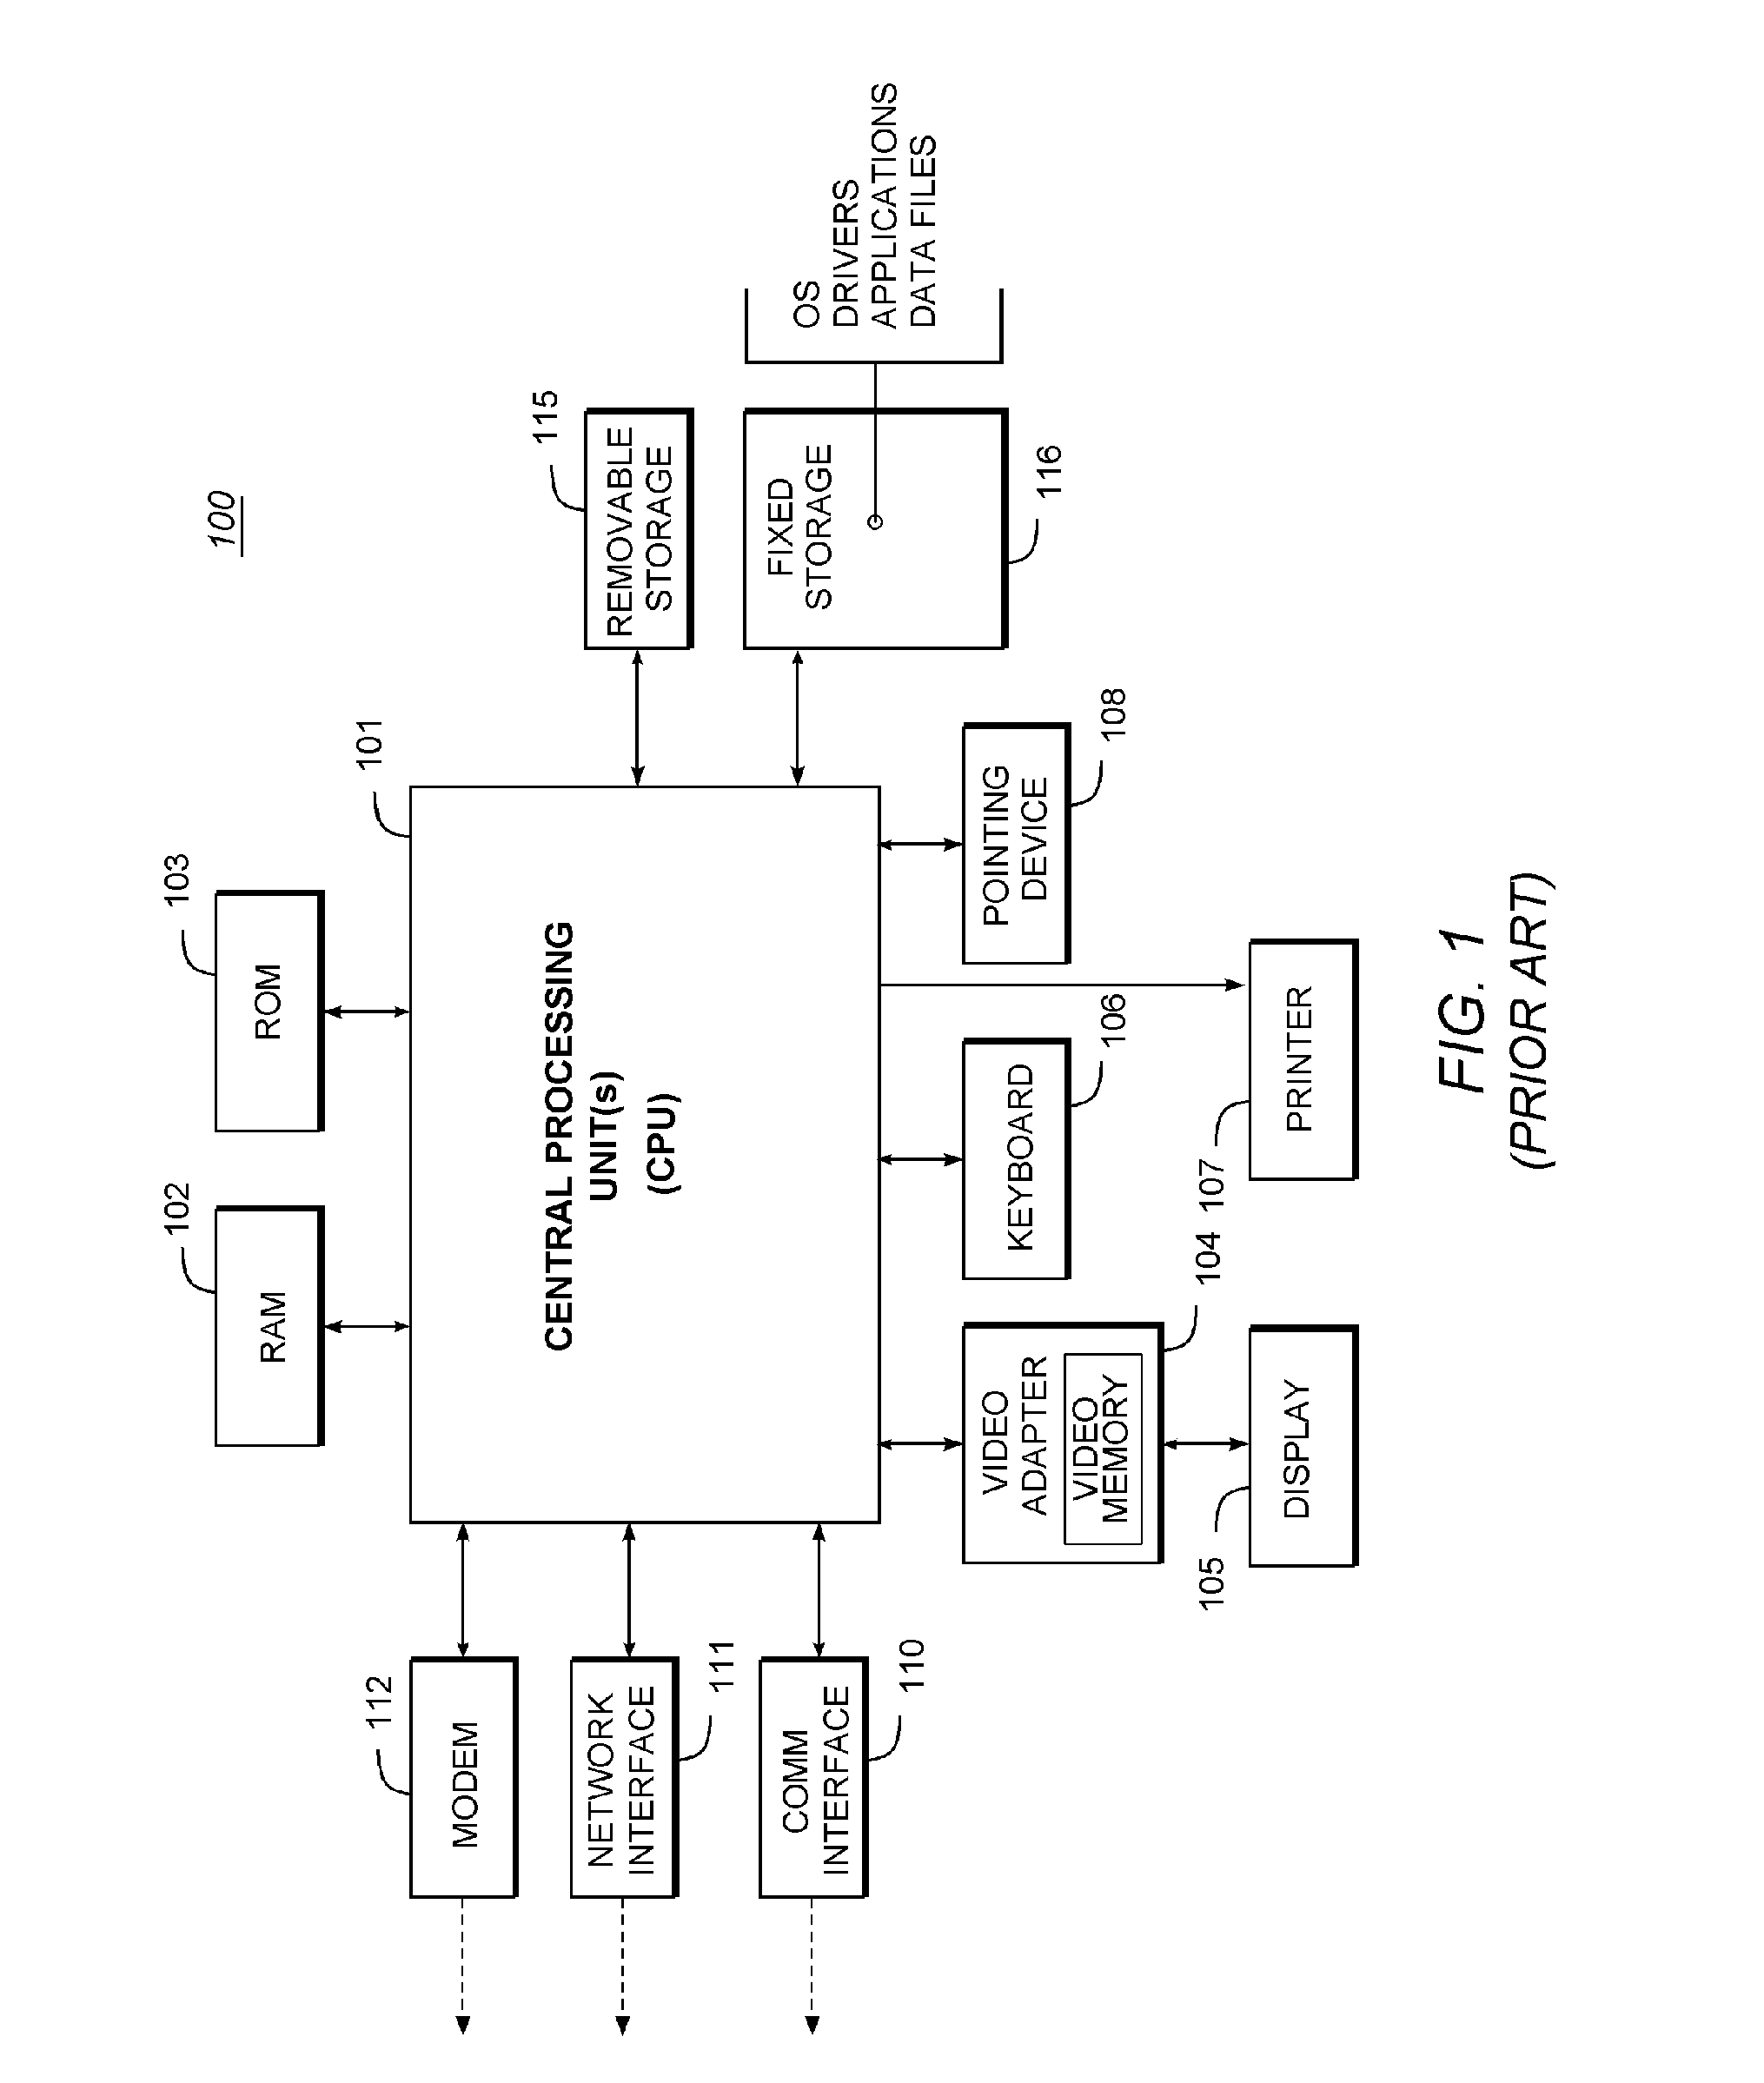 Replication System with Methodology for Replicating Stored Procedure Calls